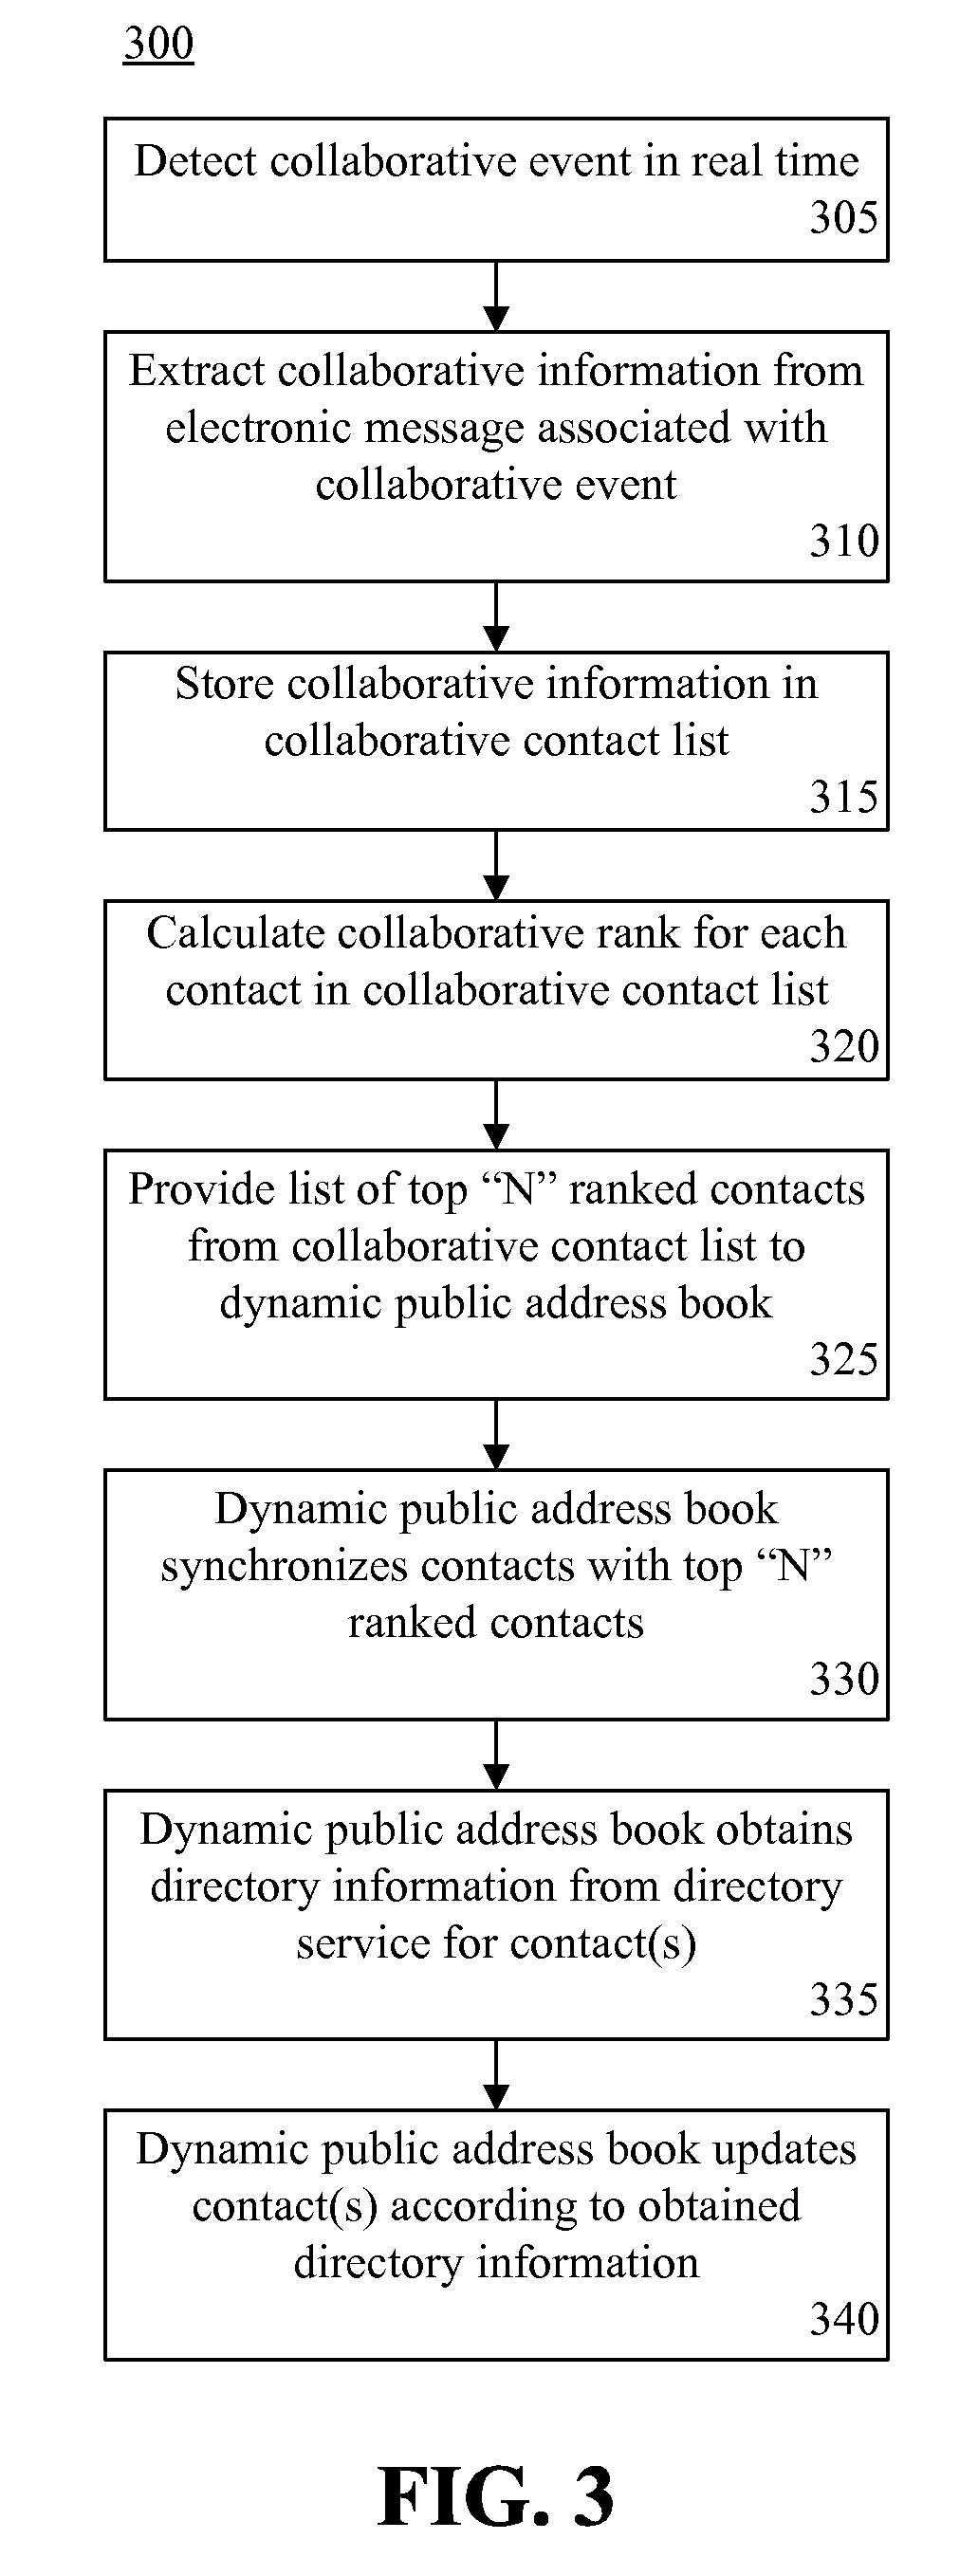 Automated contact list determination based on collaboration history